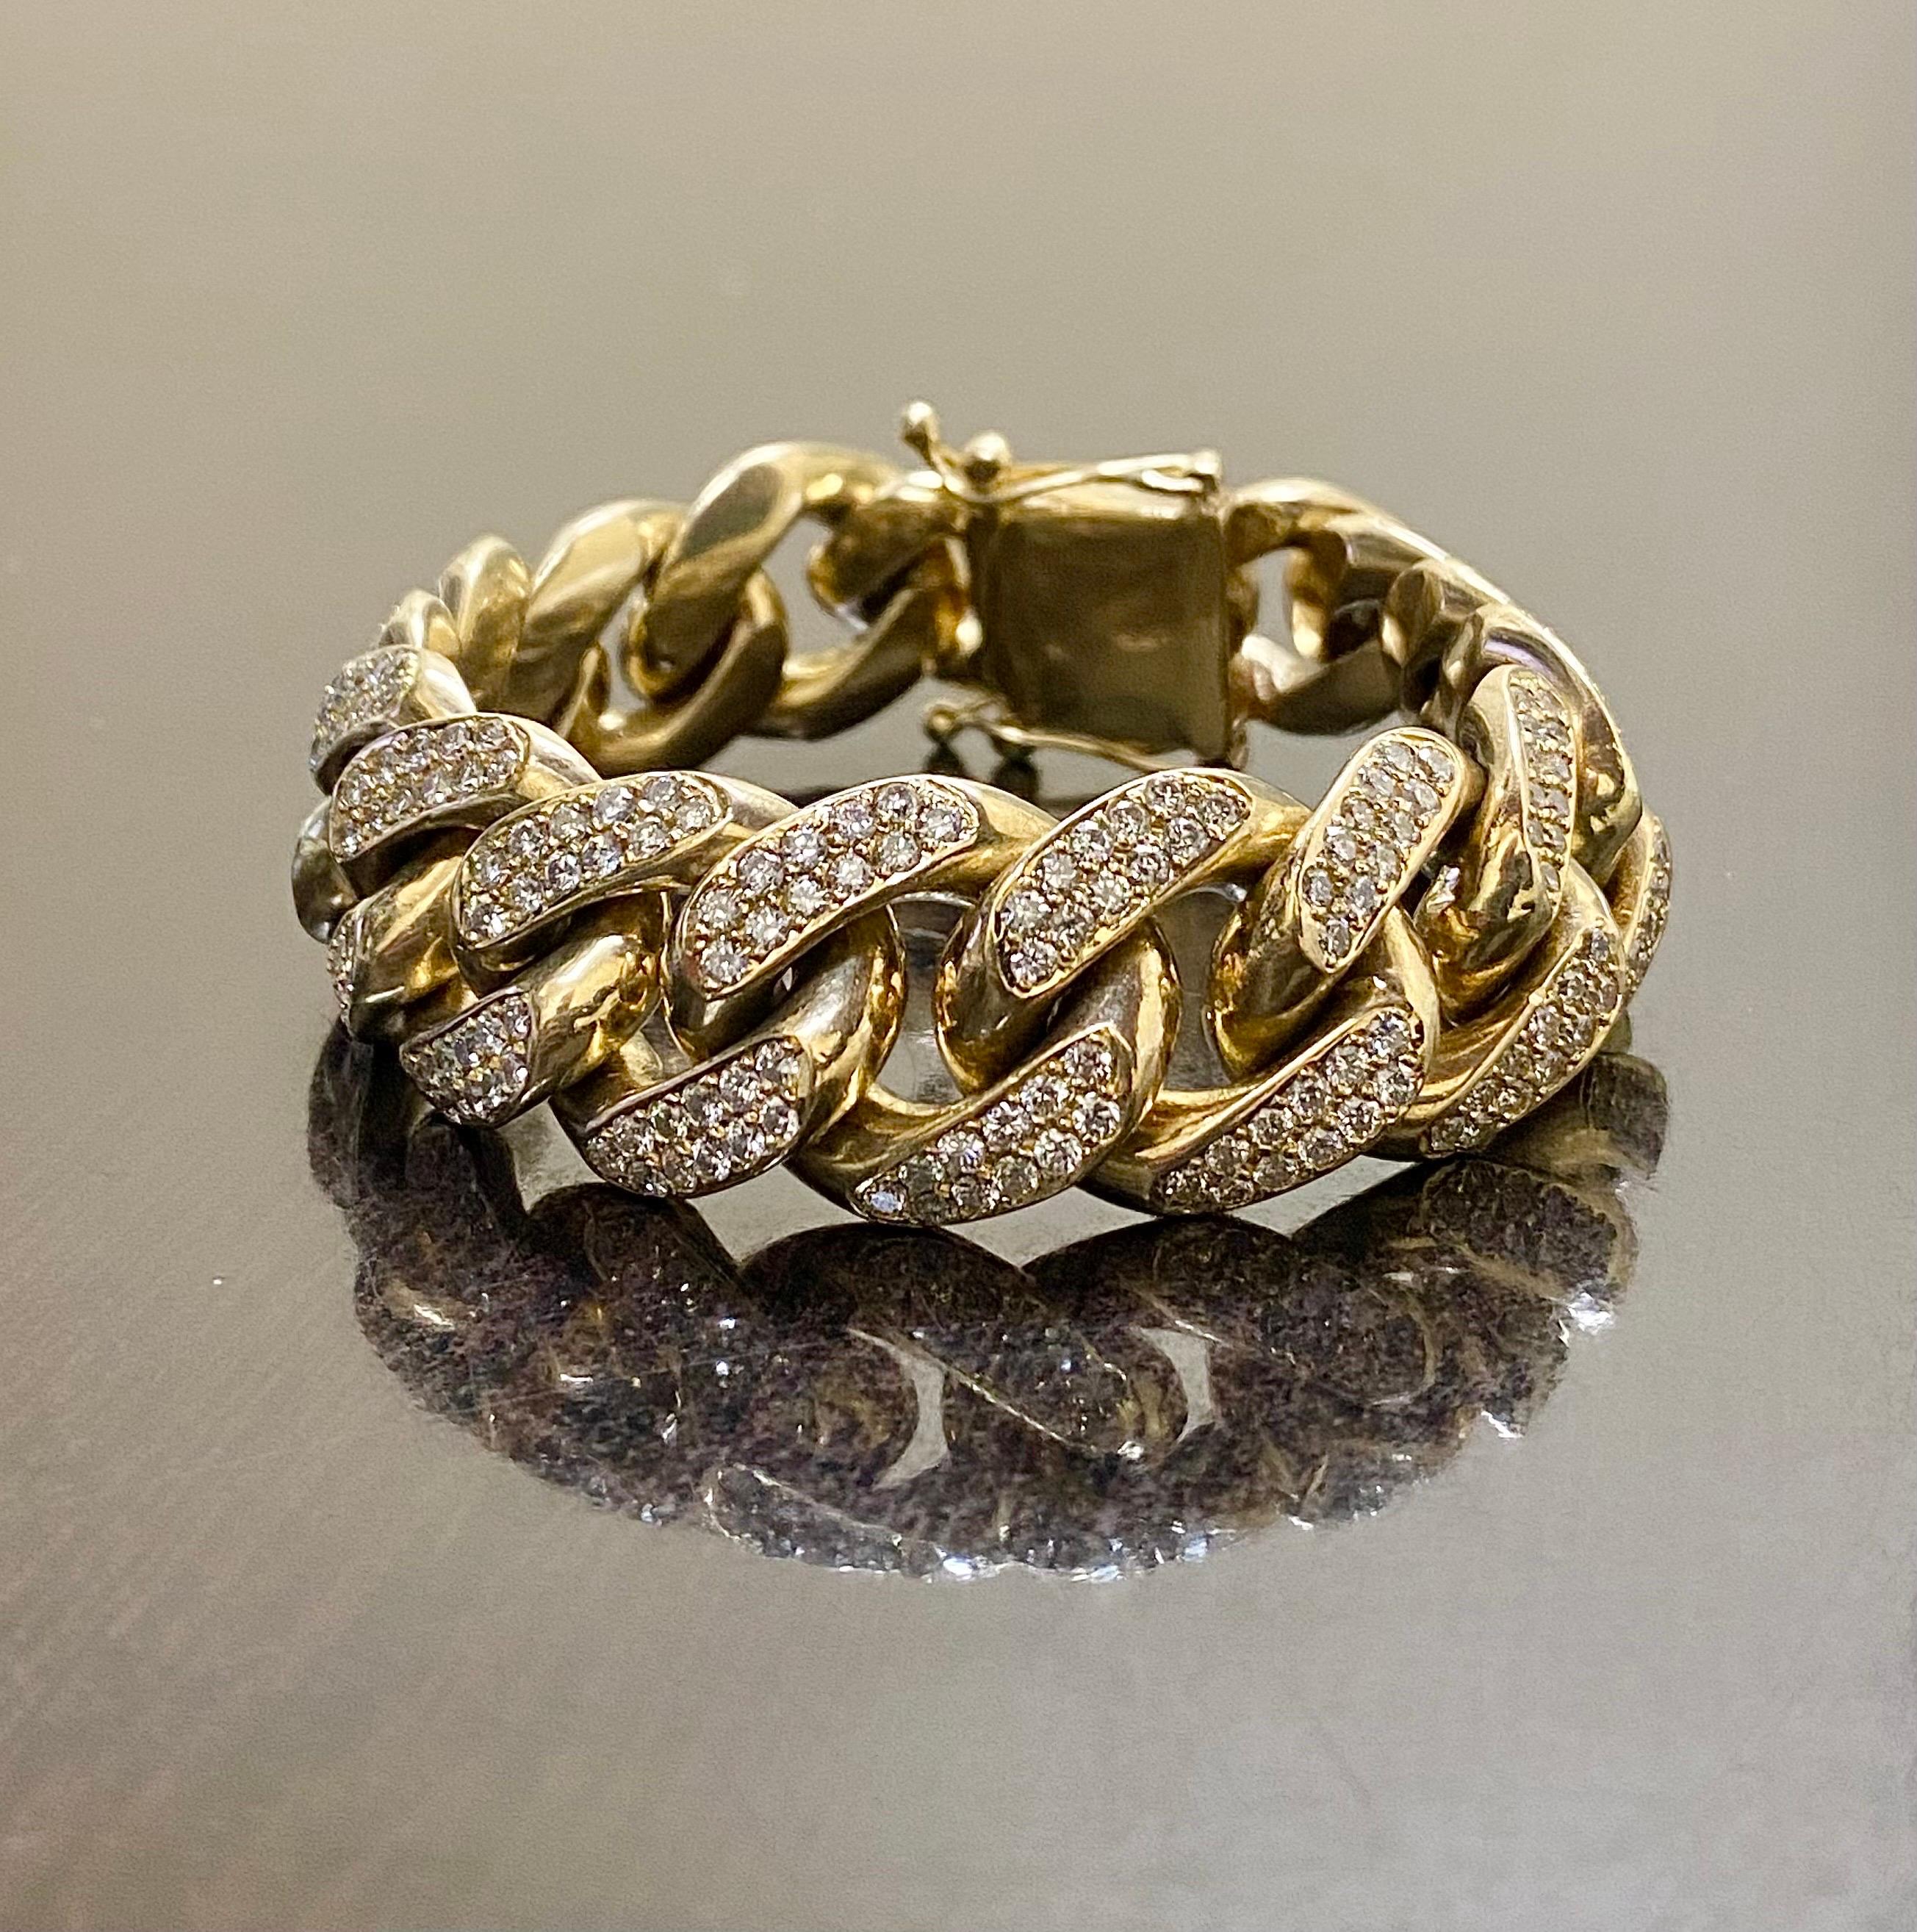 DeKara Designs Collection

High End Beautiful Yellow Gold Unisex Cuban Link Bracelet.

Metal- 14K Yellow Gold, .583, 160 Grams.

Stones- 308 Round Diamonds G Color VS2-SI1 Clarity 9.24 Carats.

An amazing piece of jewelry!!! This is a extremely